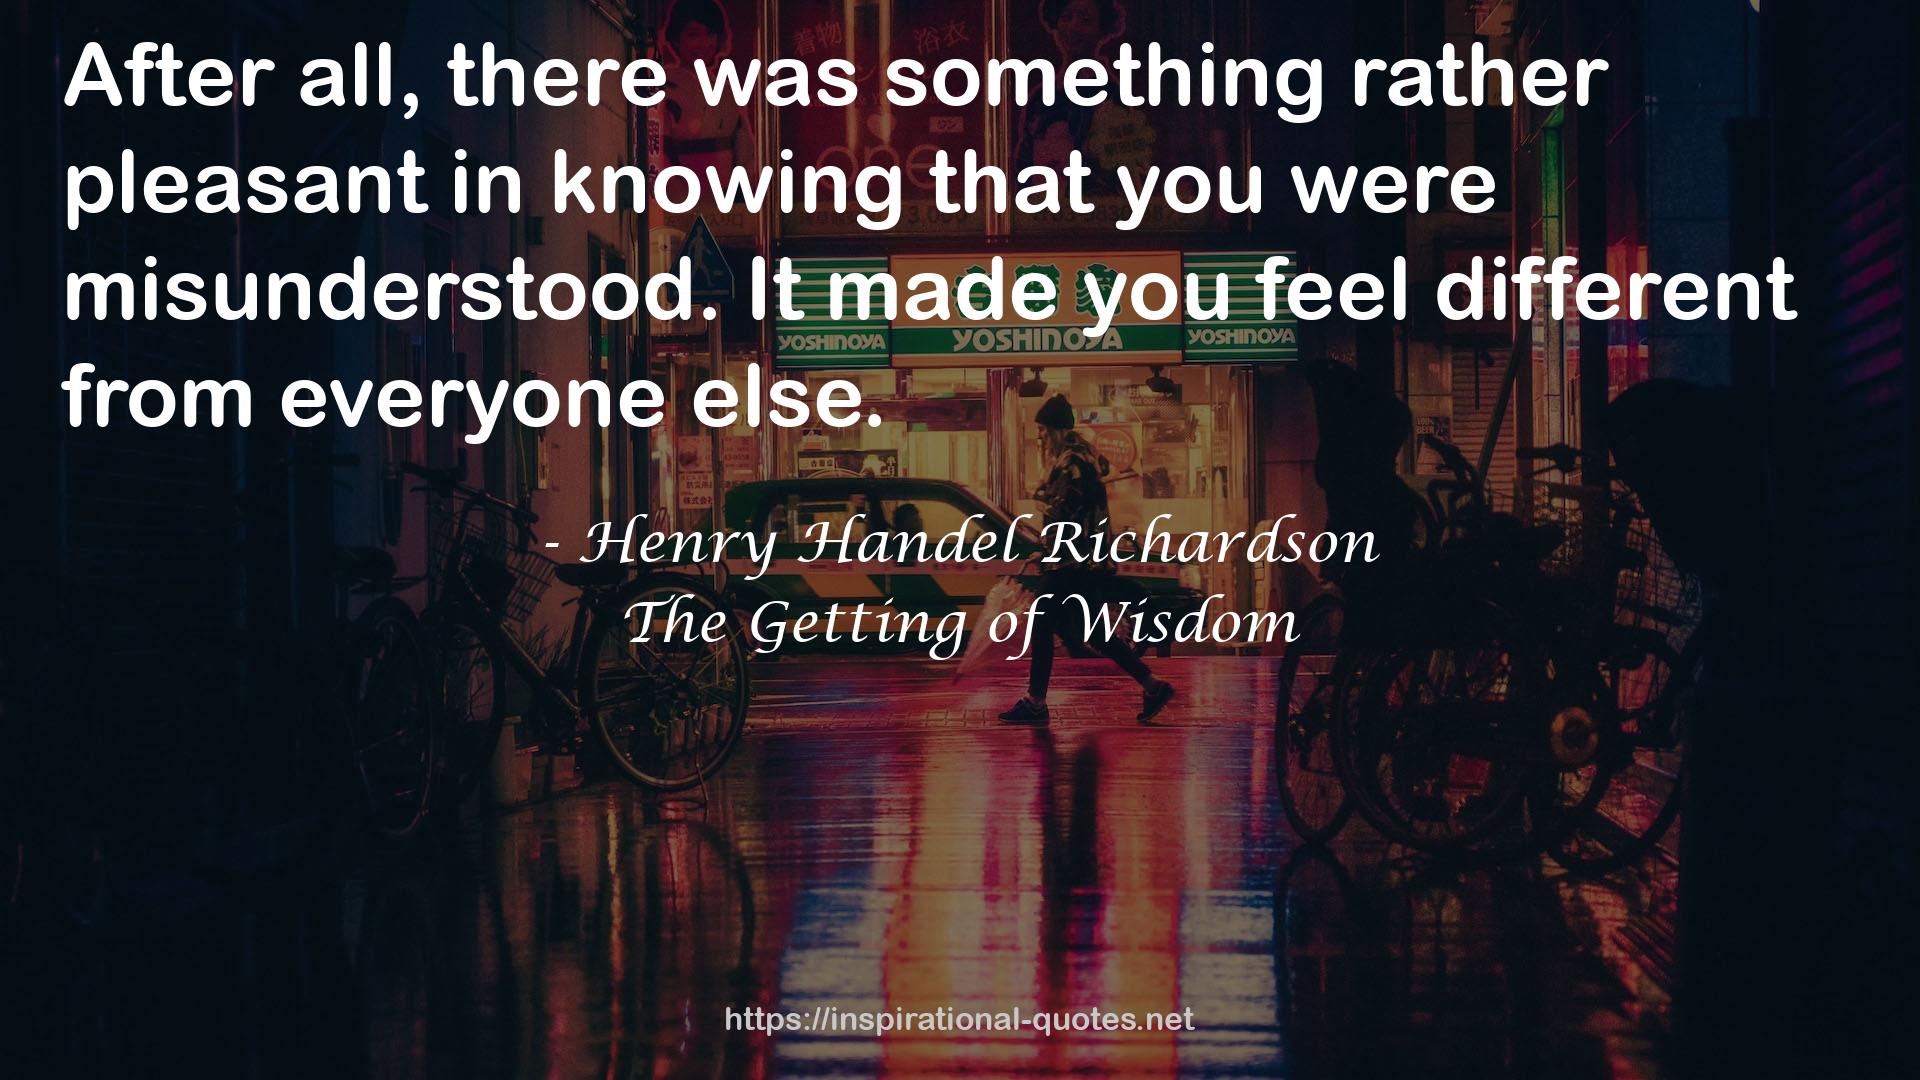 The Getting of Wisdom QUOTES